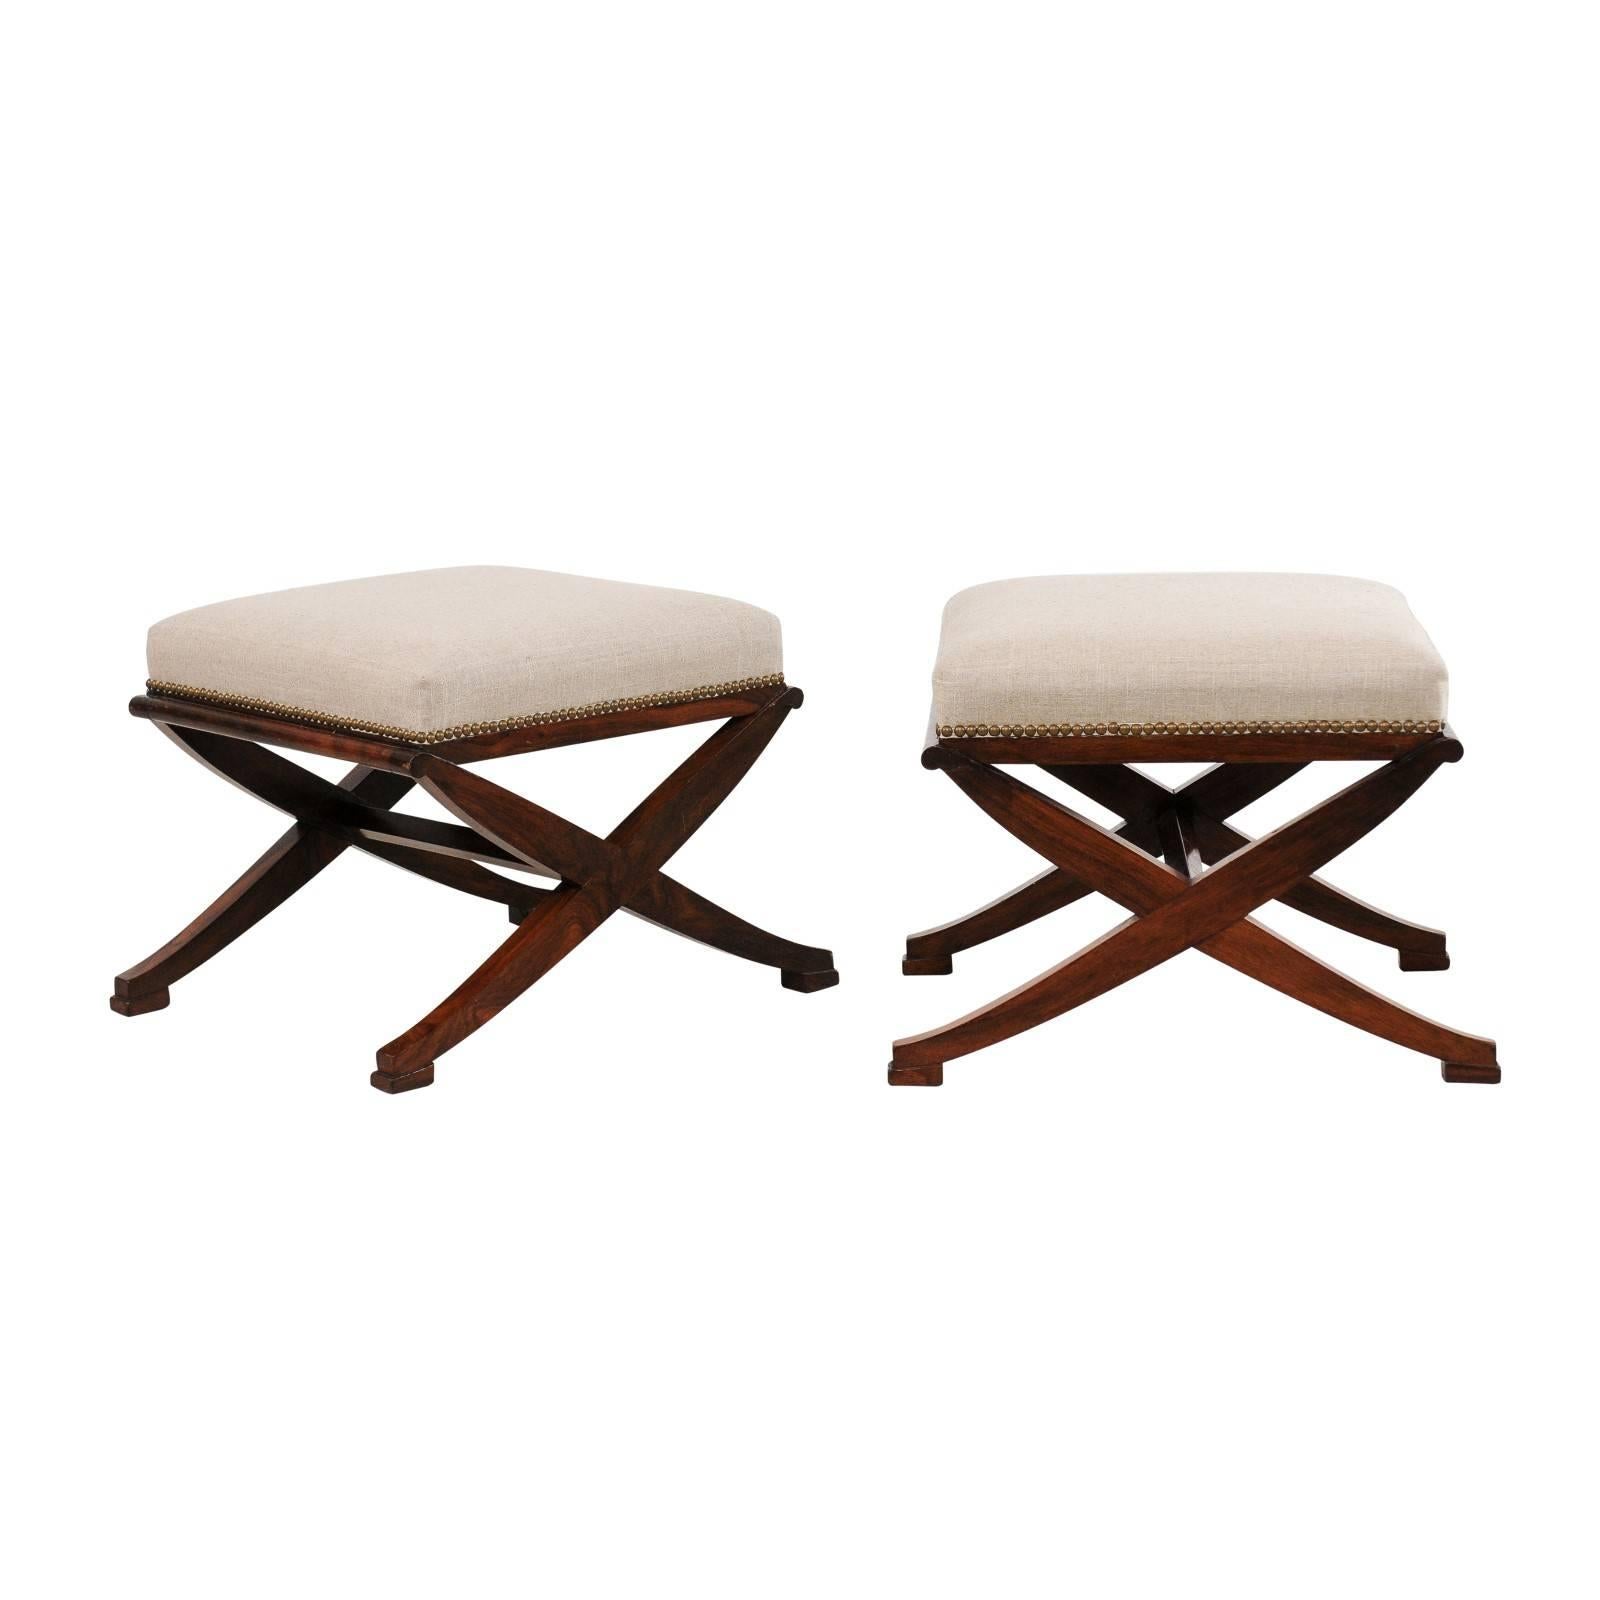 Pair of French Mahogany X-Form Stools, circa 1870 with Newly Upholstered Seats